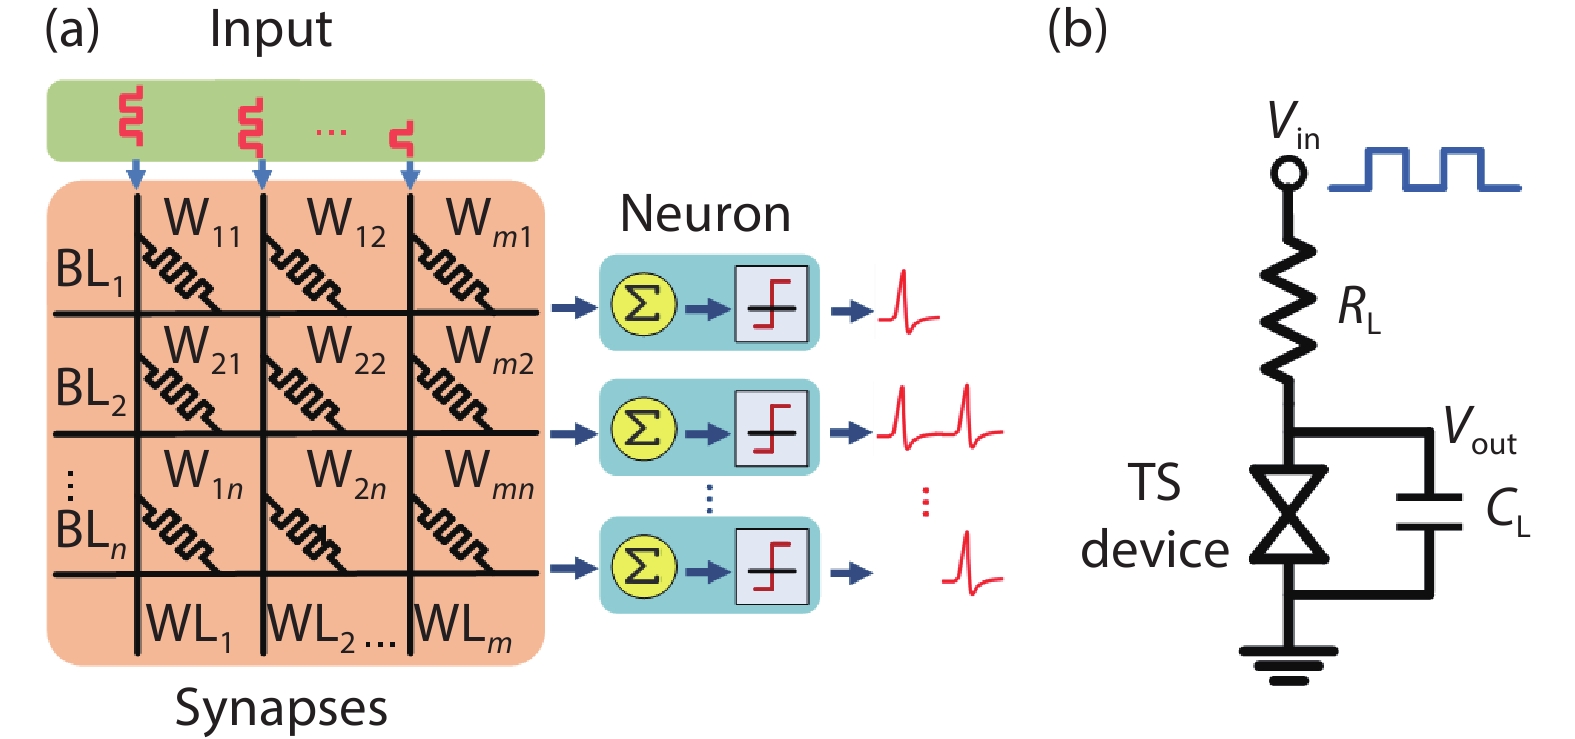 (Color online) (a) Schematic diagram of a typical artificial neural network. (b) Circuit implementation of the oscillation neuron with a TS device.